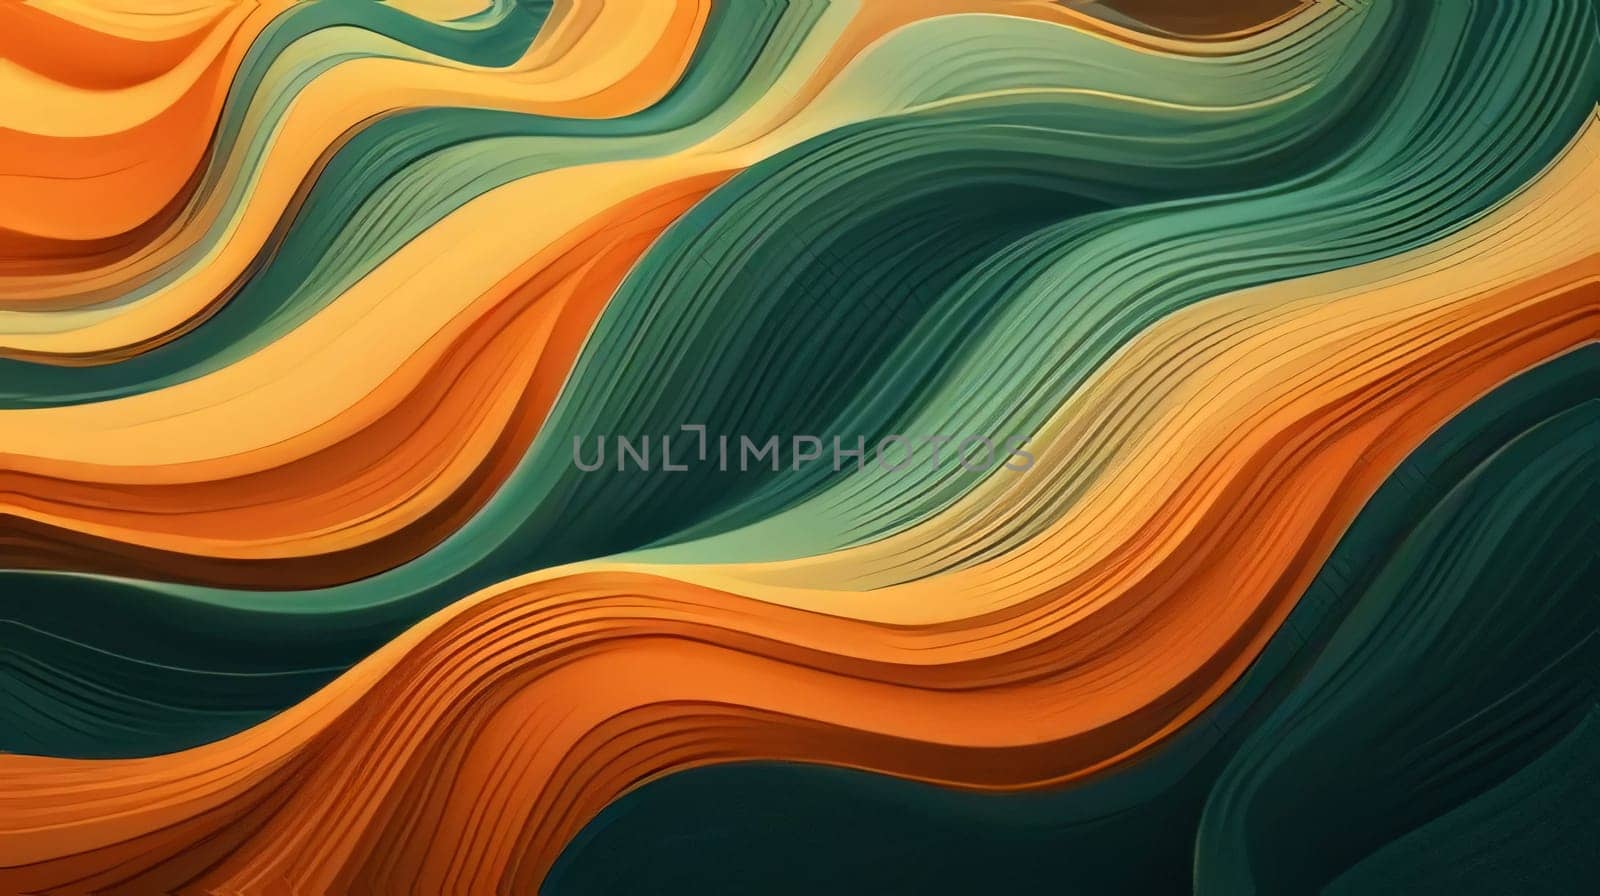 Abstract background design: 3d rendering of colorful abstract wavy background. Computer digital drawing.